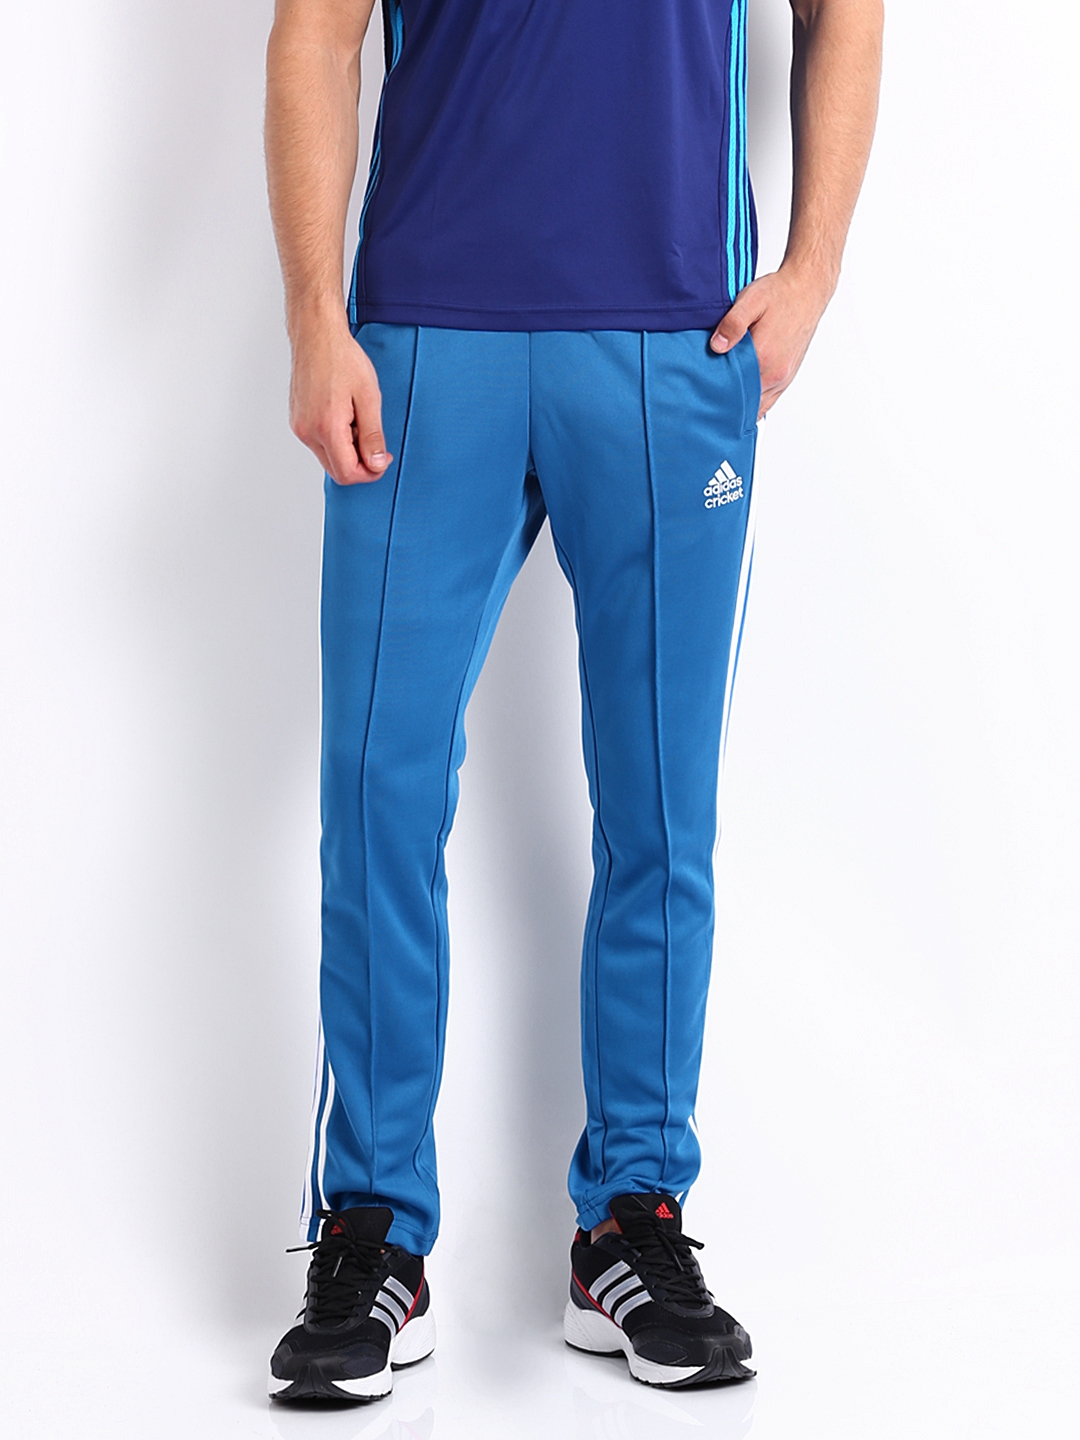 Cricket Track Pants Online Shopping - Arjun Series from Omtex